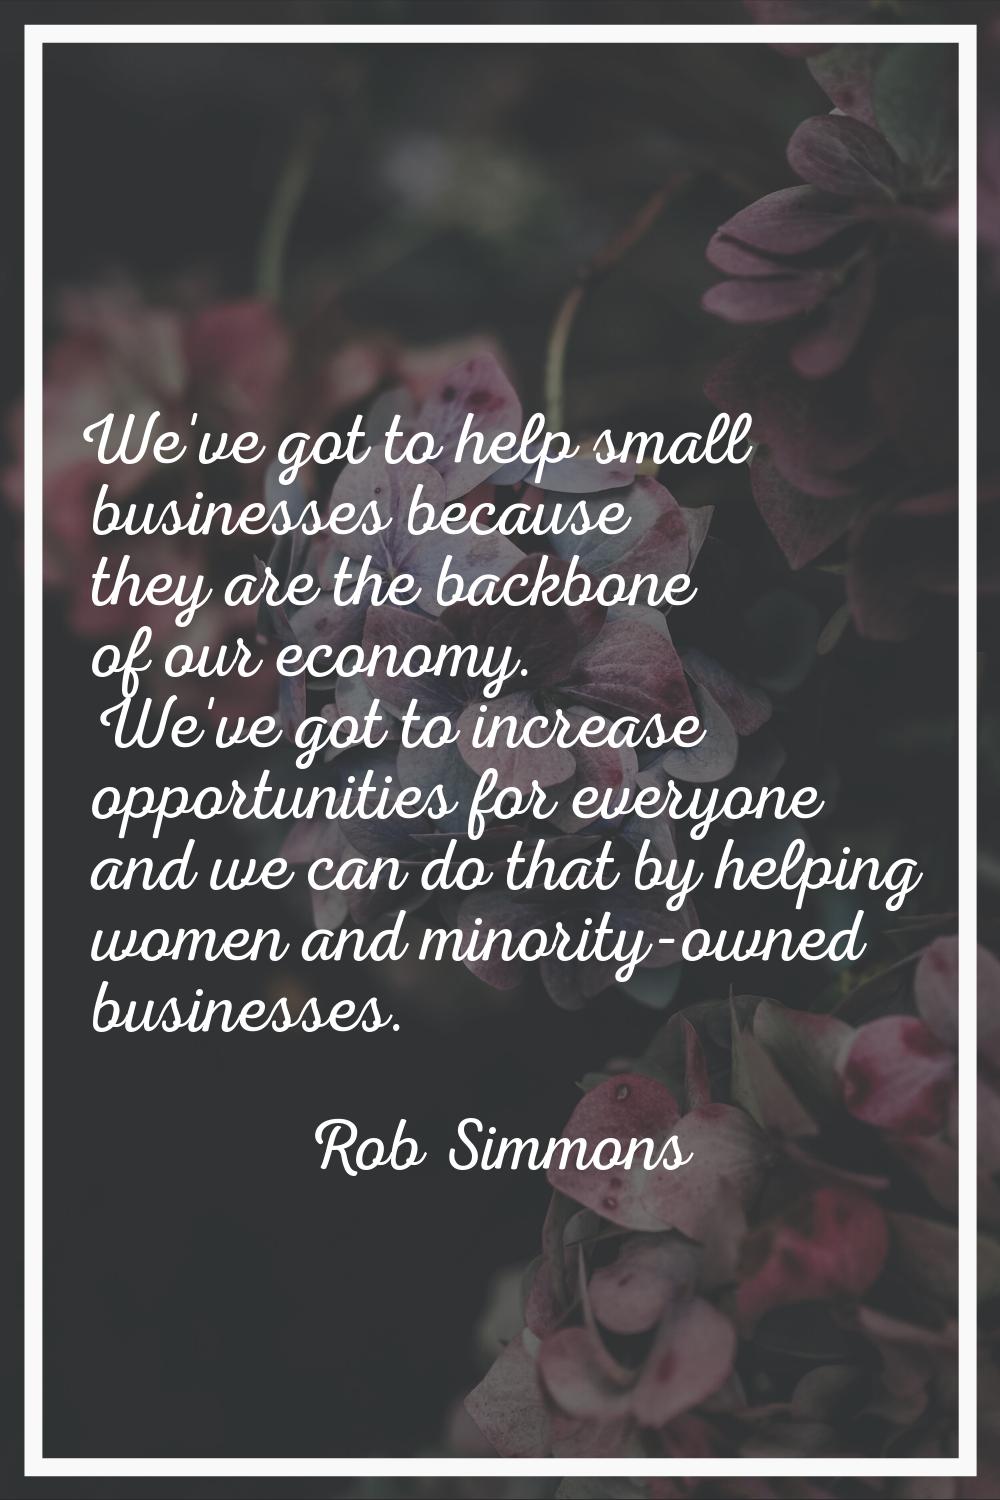 We've got to help small businesses because they are the backbone of our economy. We've got to incre